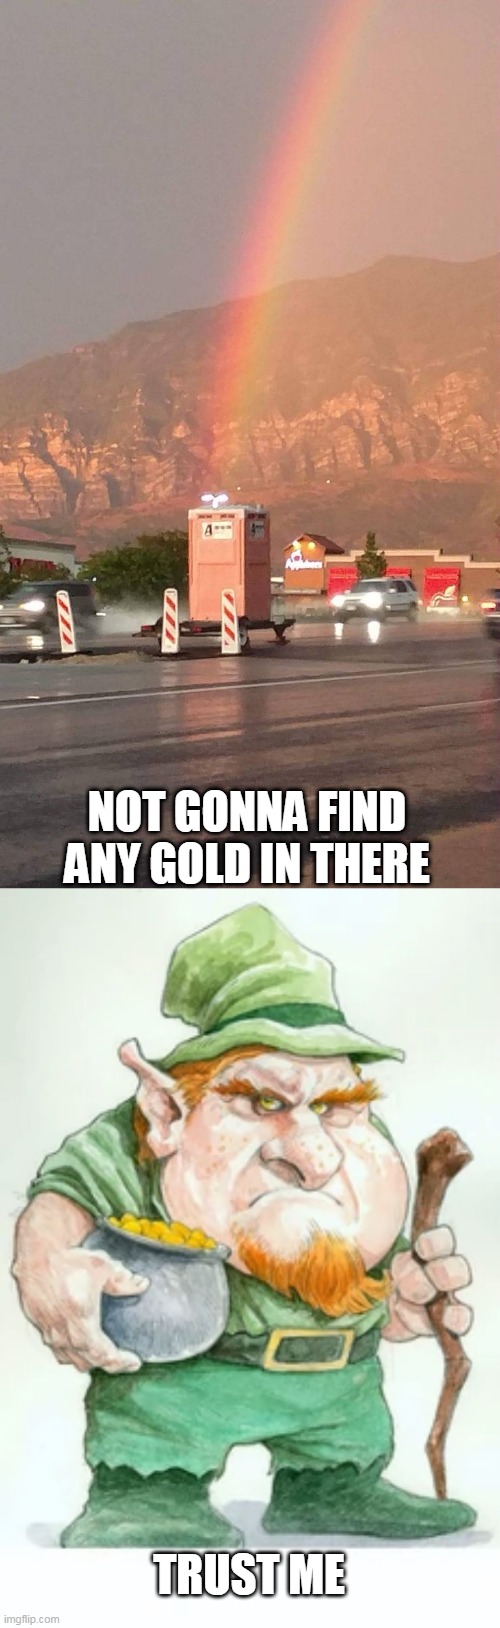 I'LL TAKE HIS WORD ON IT | NOT GONNA FIND ANY GOLD IN THERE; TRUST ME | image tagged in memes,rainbow,leprechaun,toilet | made w/ Imgflip meme maker